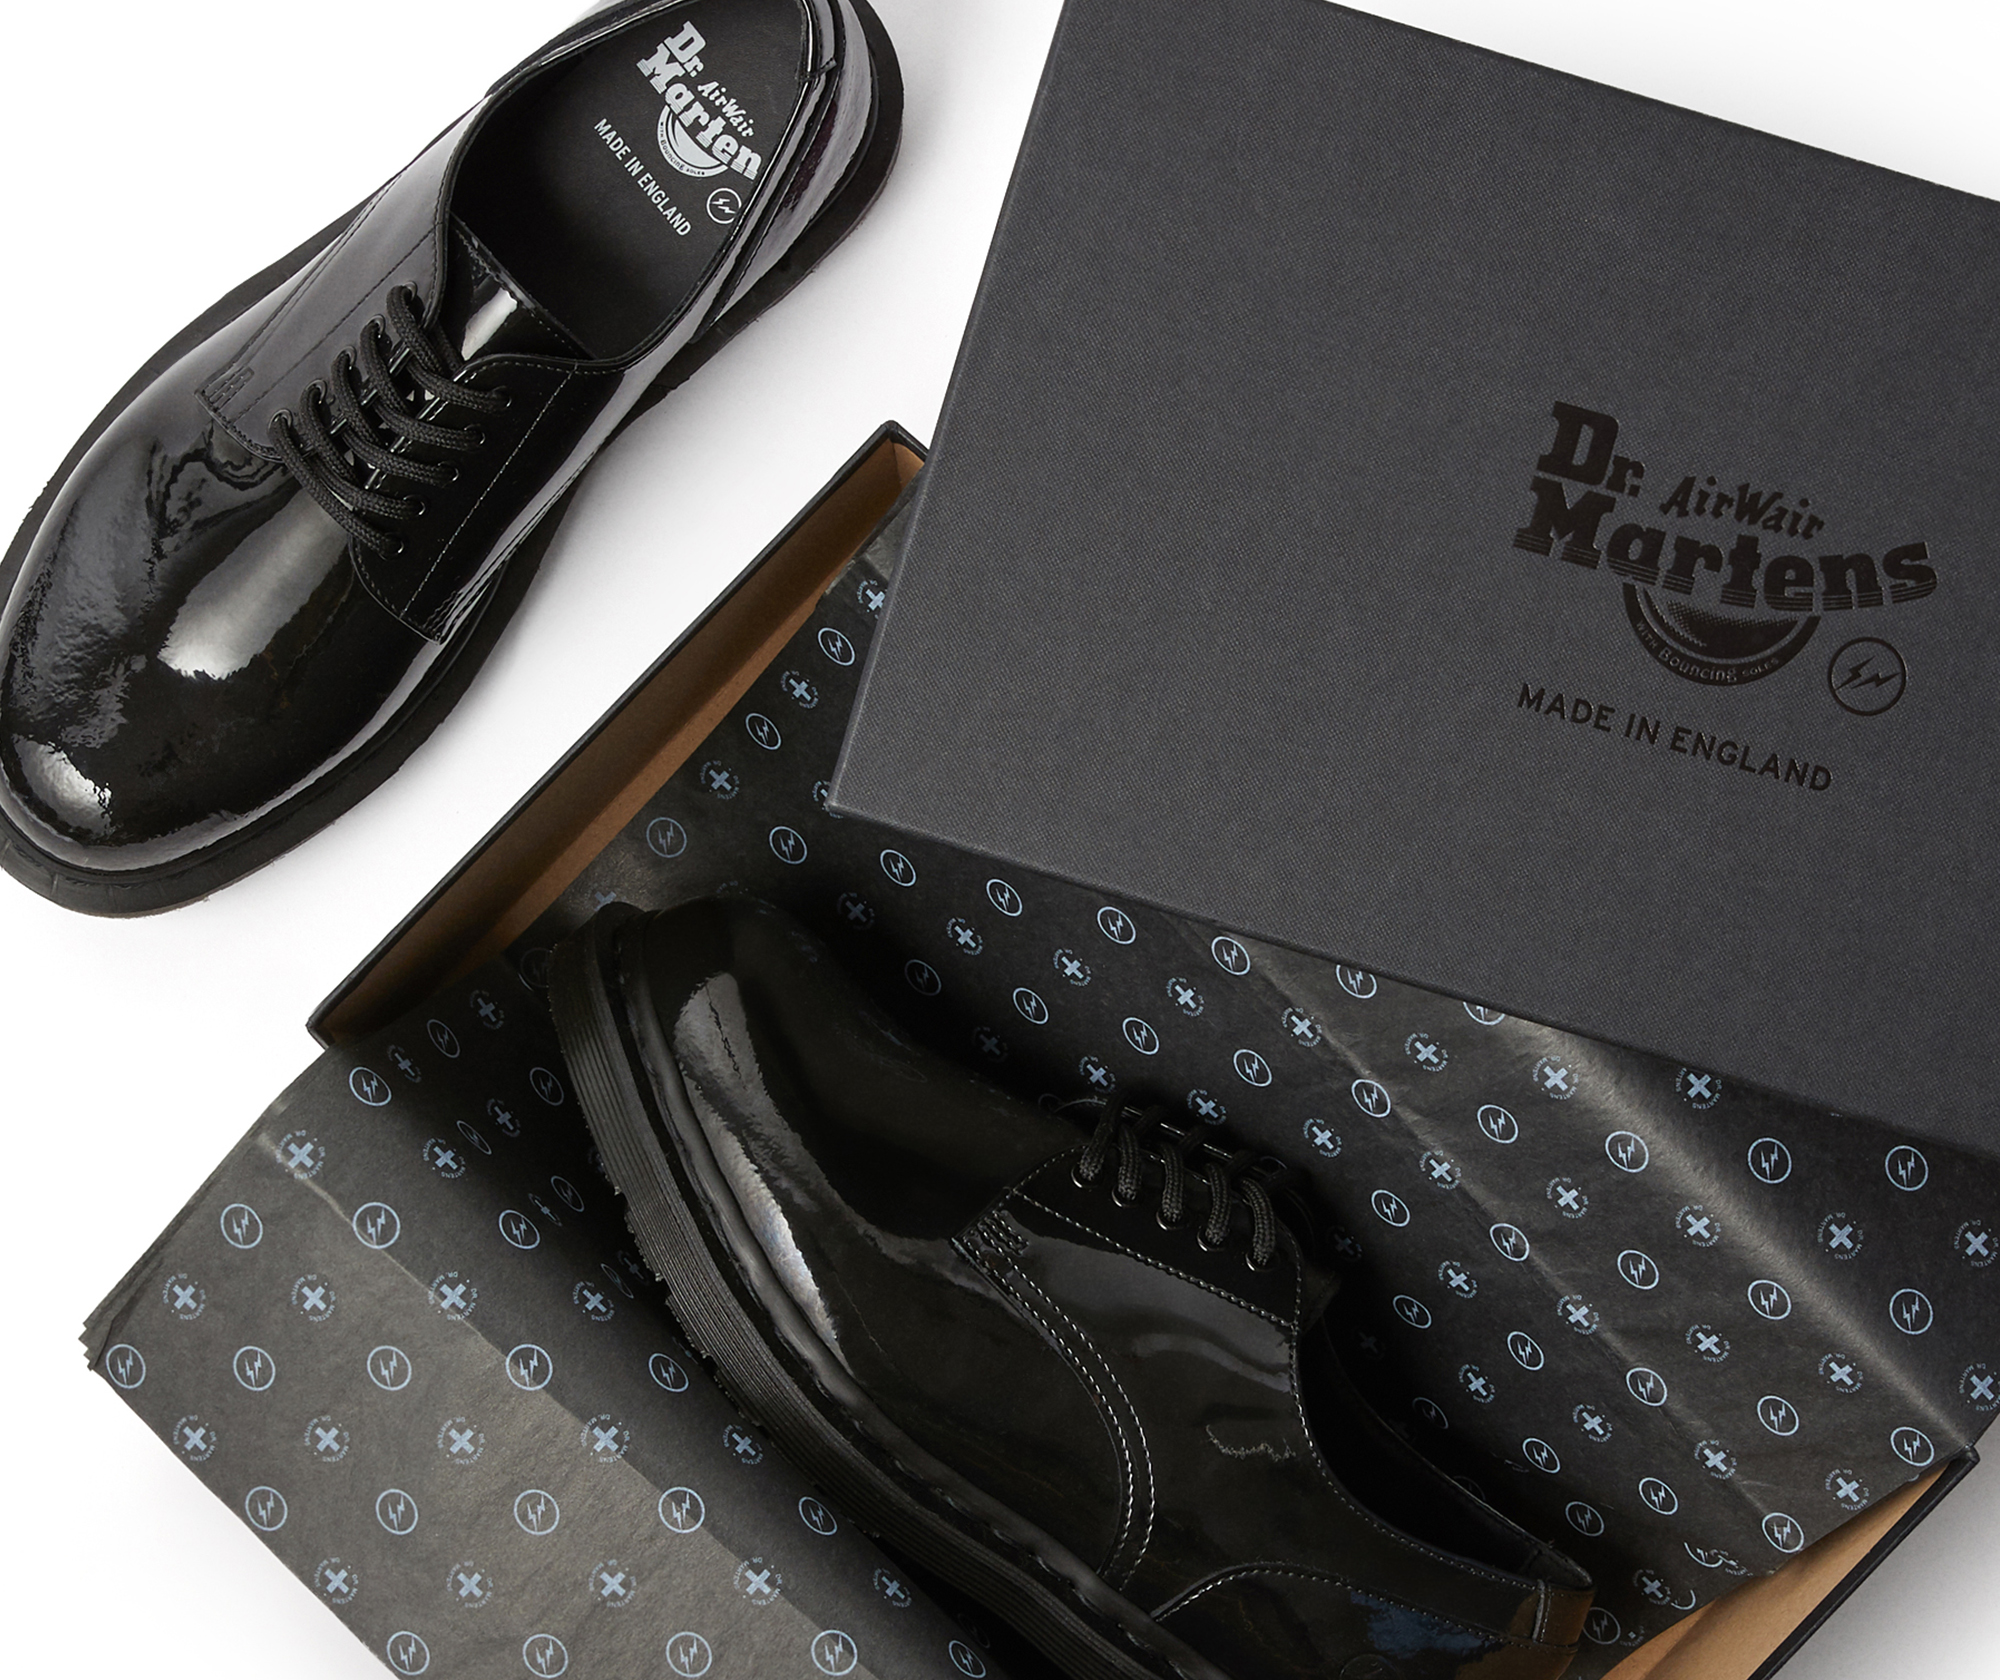 DR.MARTENS x FRAGMENTDESIGN The first collaboration shoes to be 